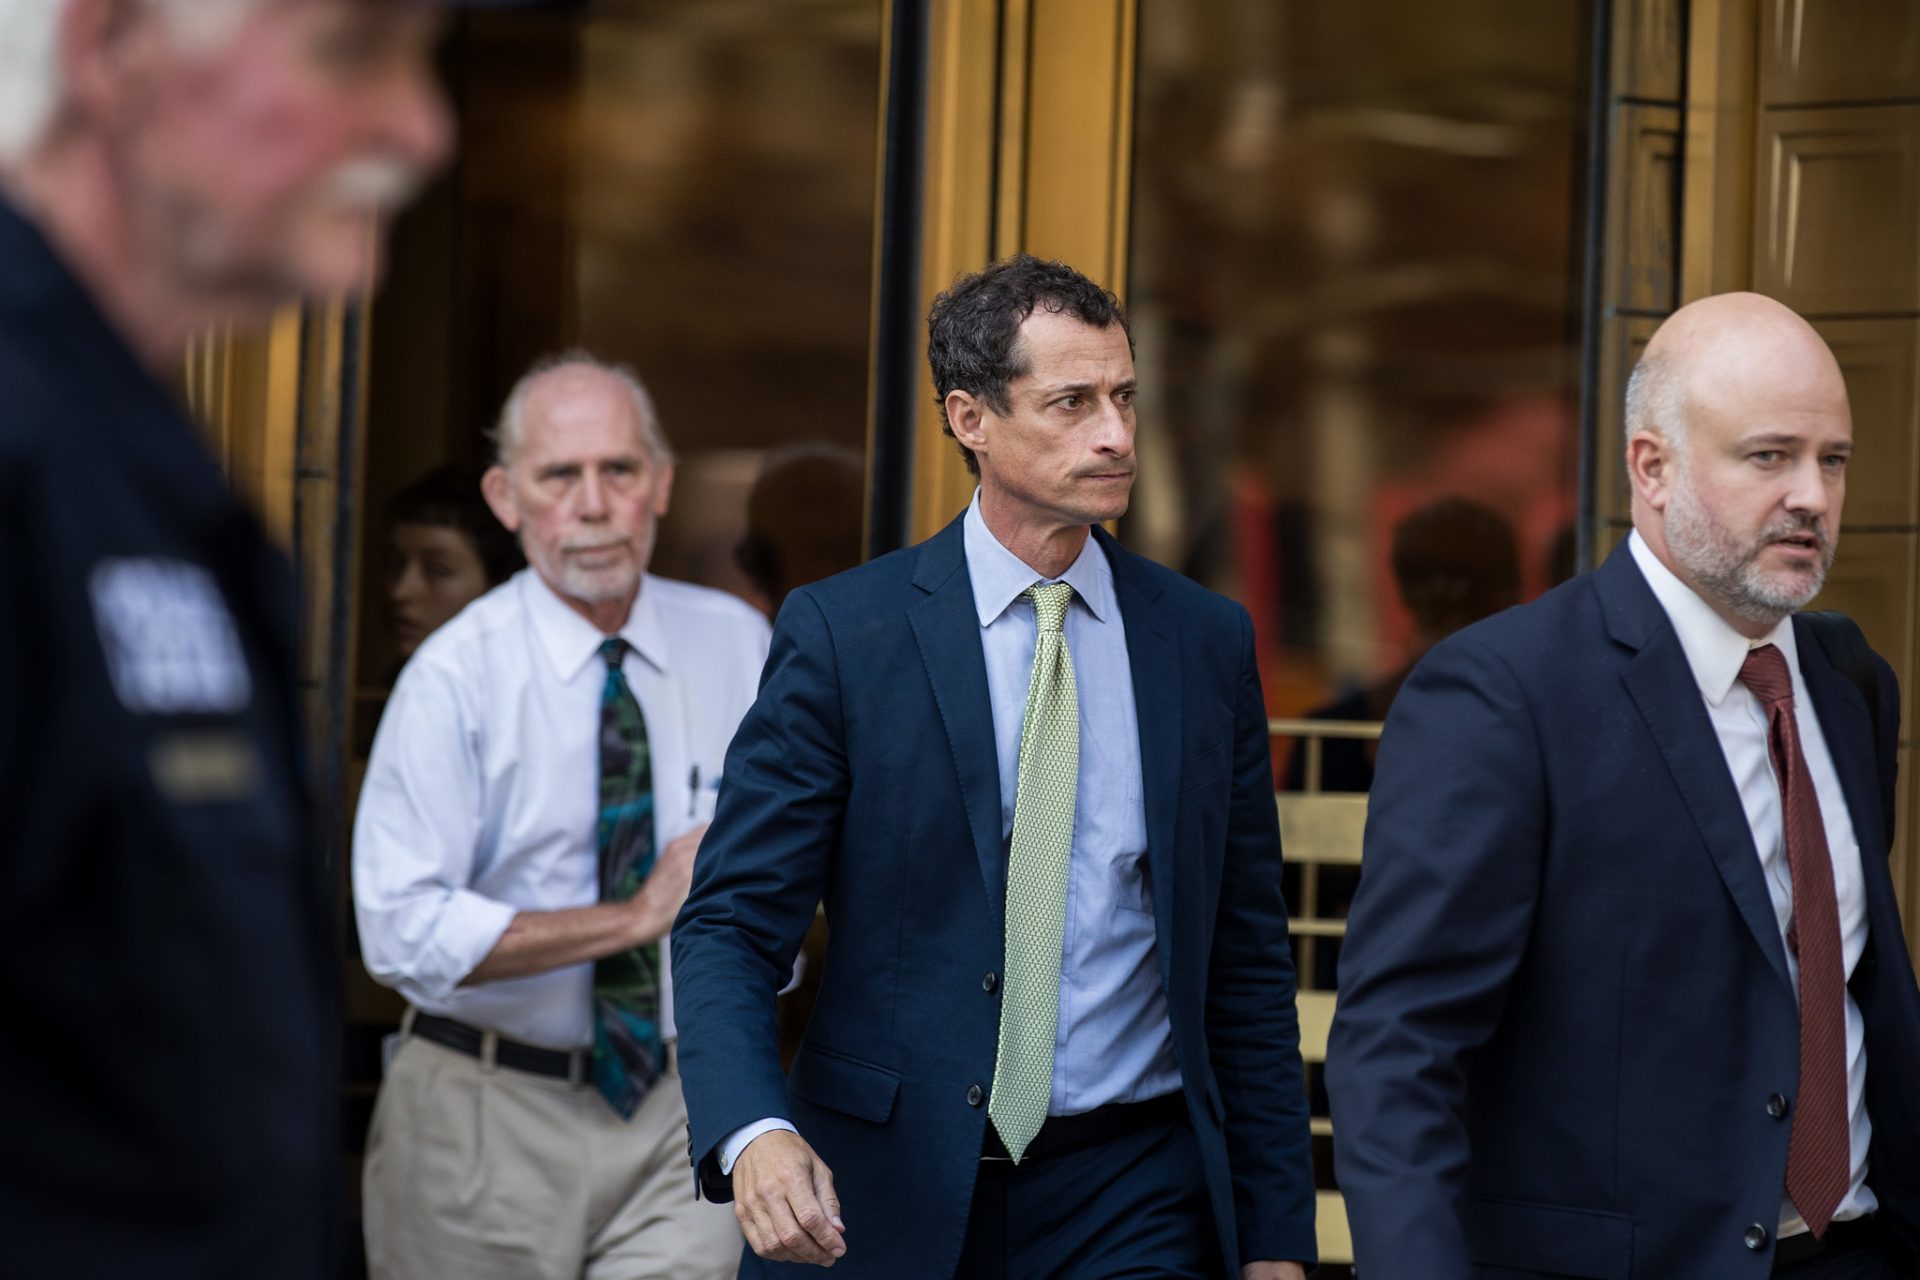 why did anthony weiner go to prison